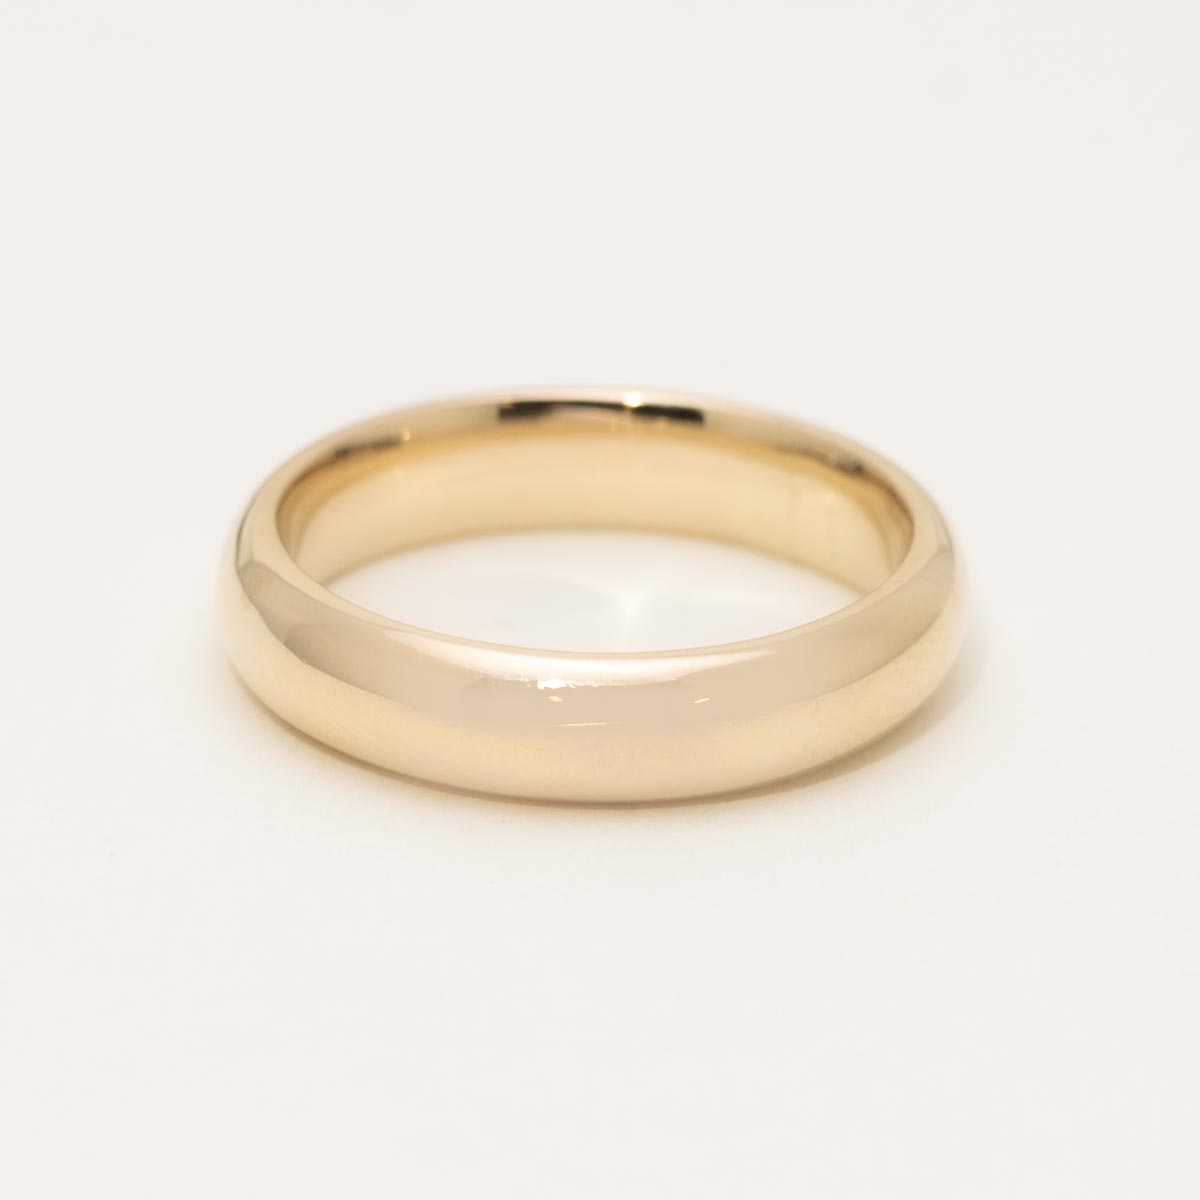 Estate Plain Wedding Band in 14kt Yellow Gold (5.3mm)